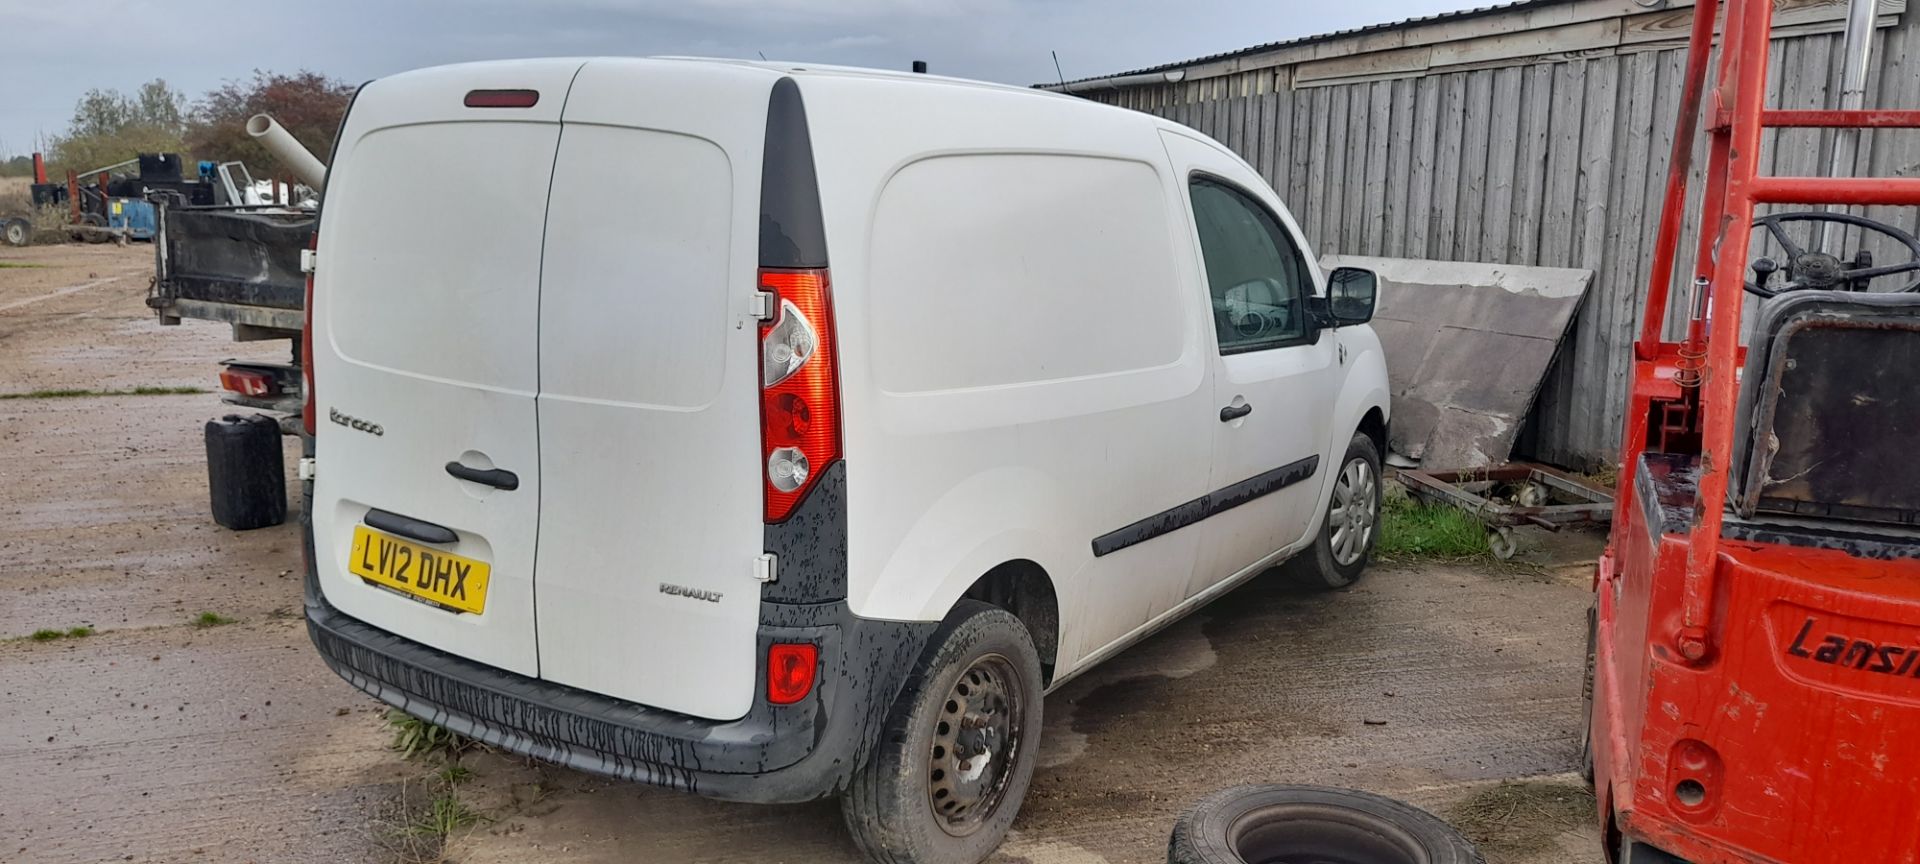 Renault Kangoo Registration LV12 DHX – Spares or R - Image 4 of 7